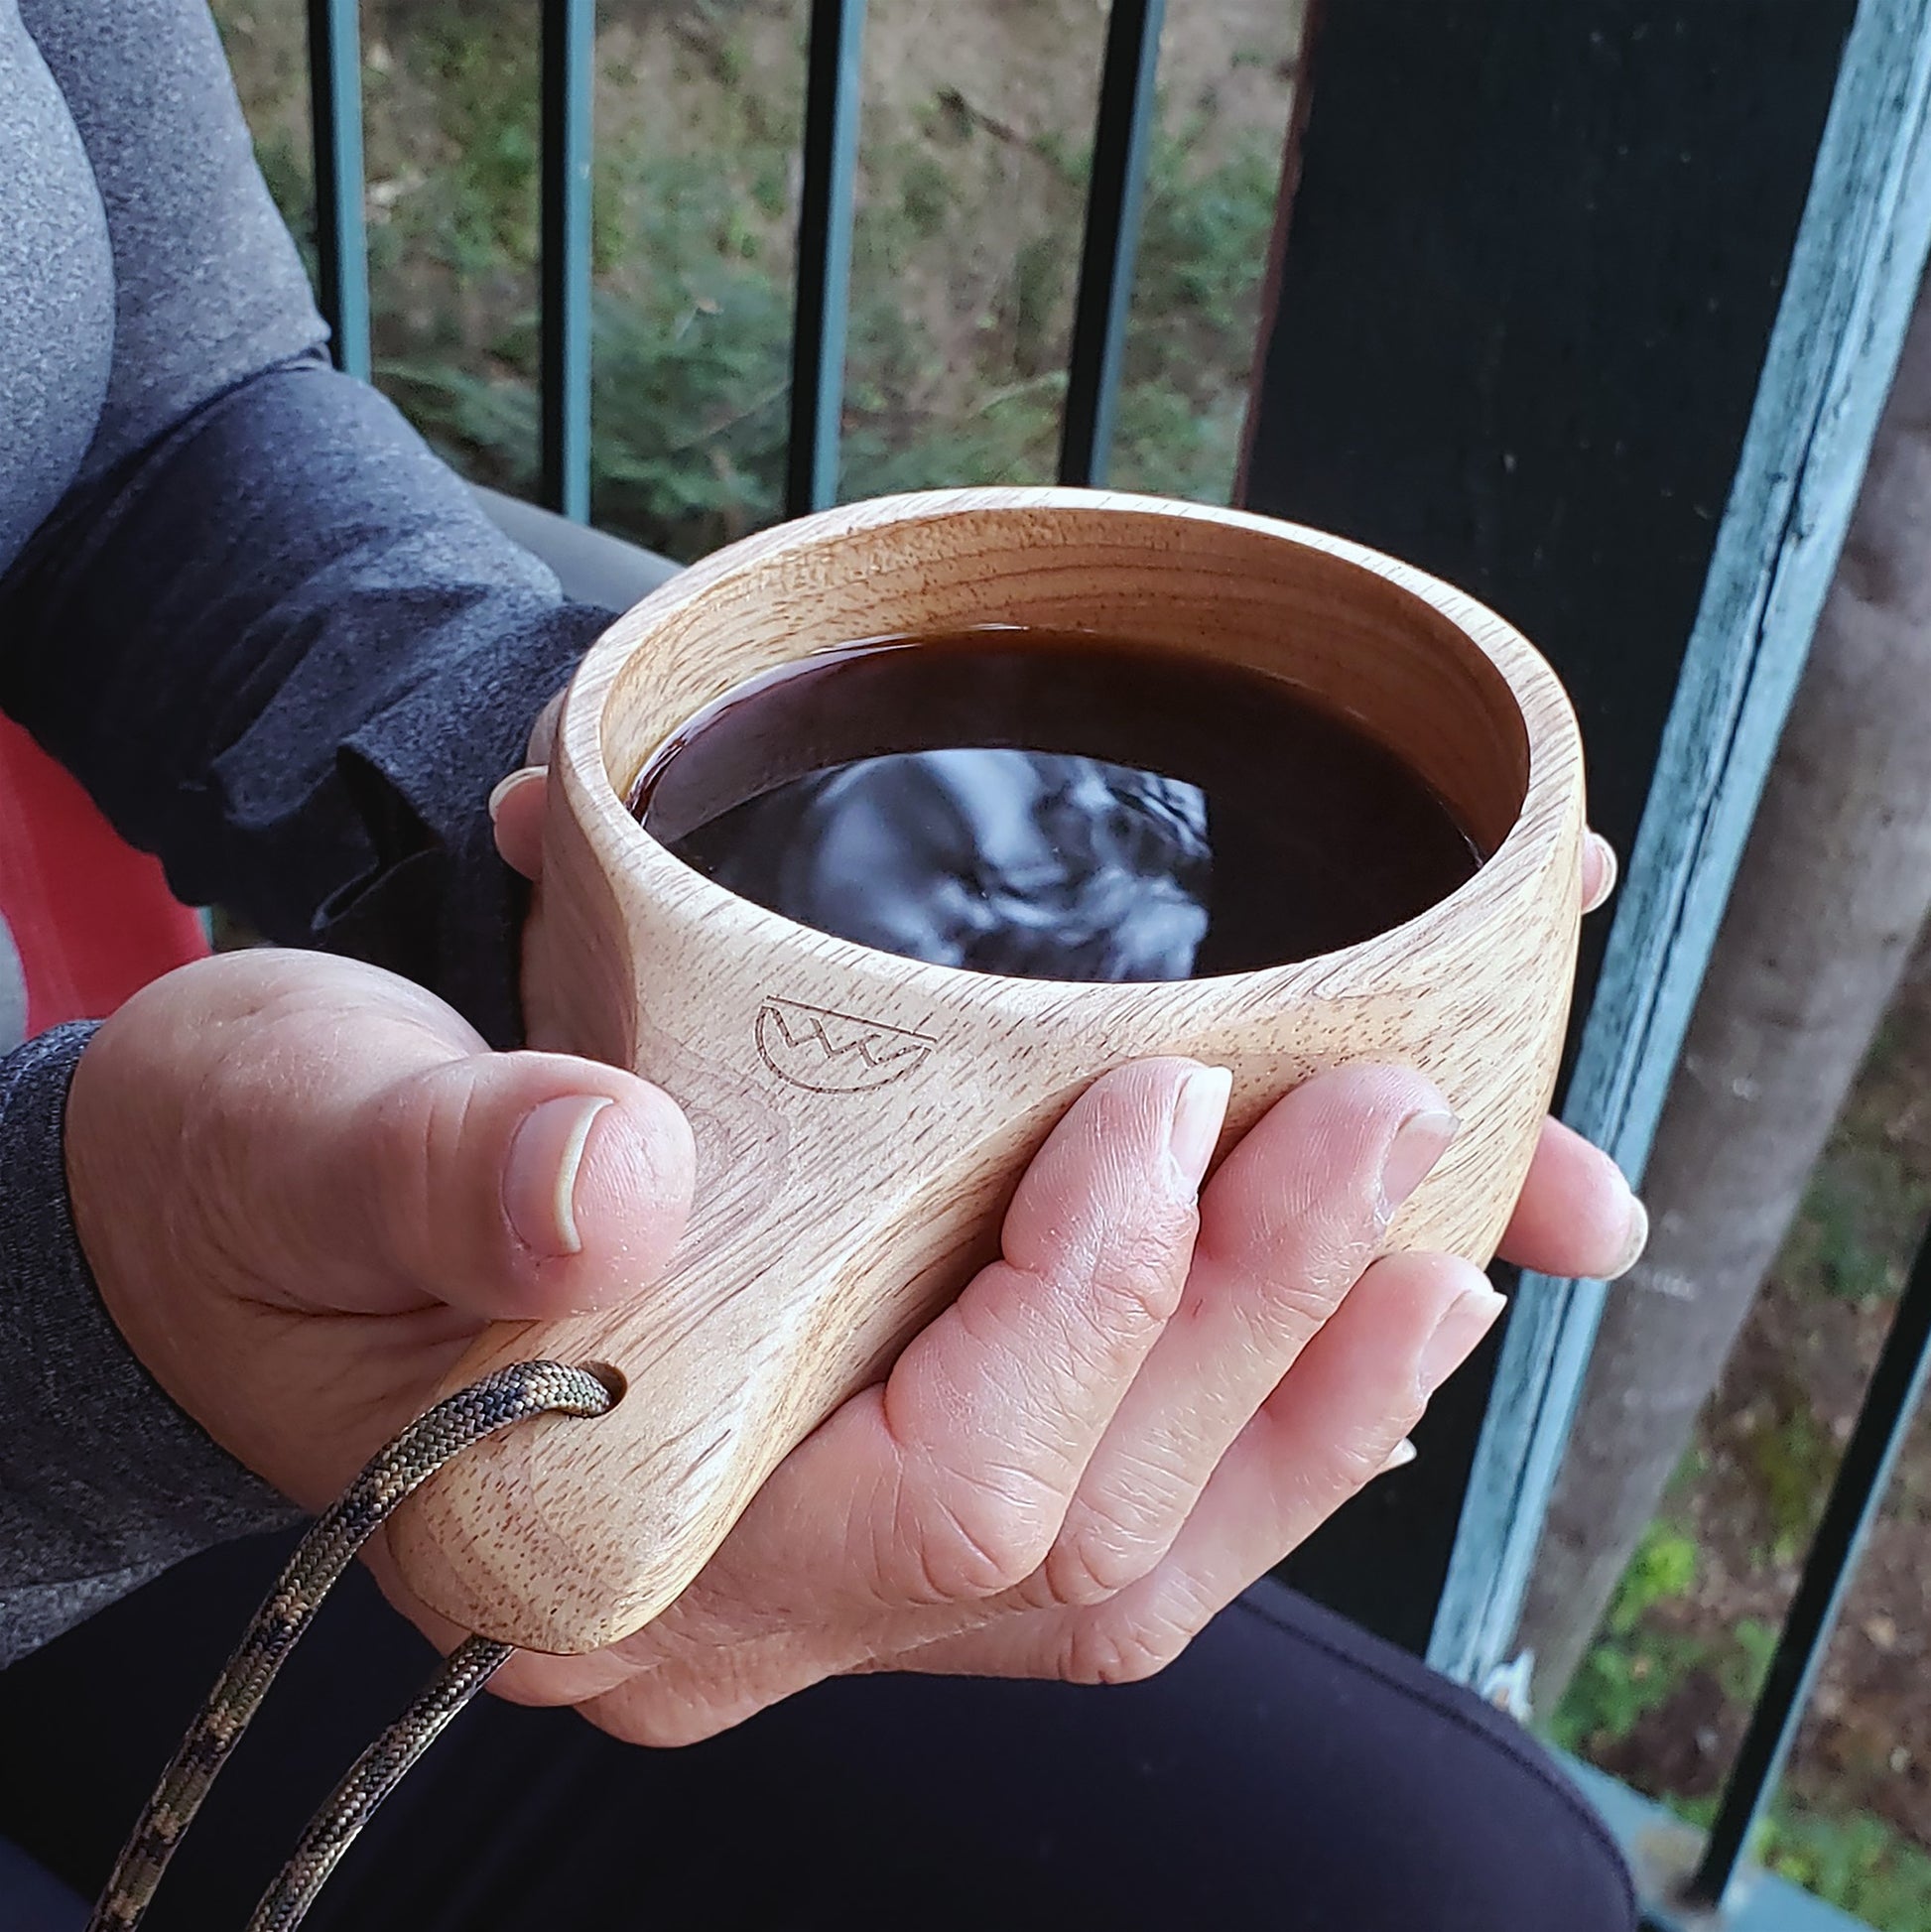 KUKSA CUP MADE OF OLIVE WOOD